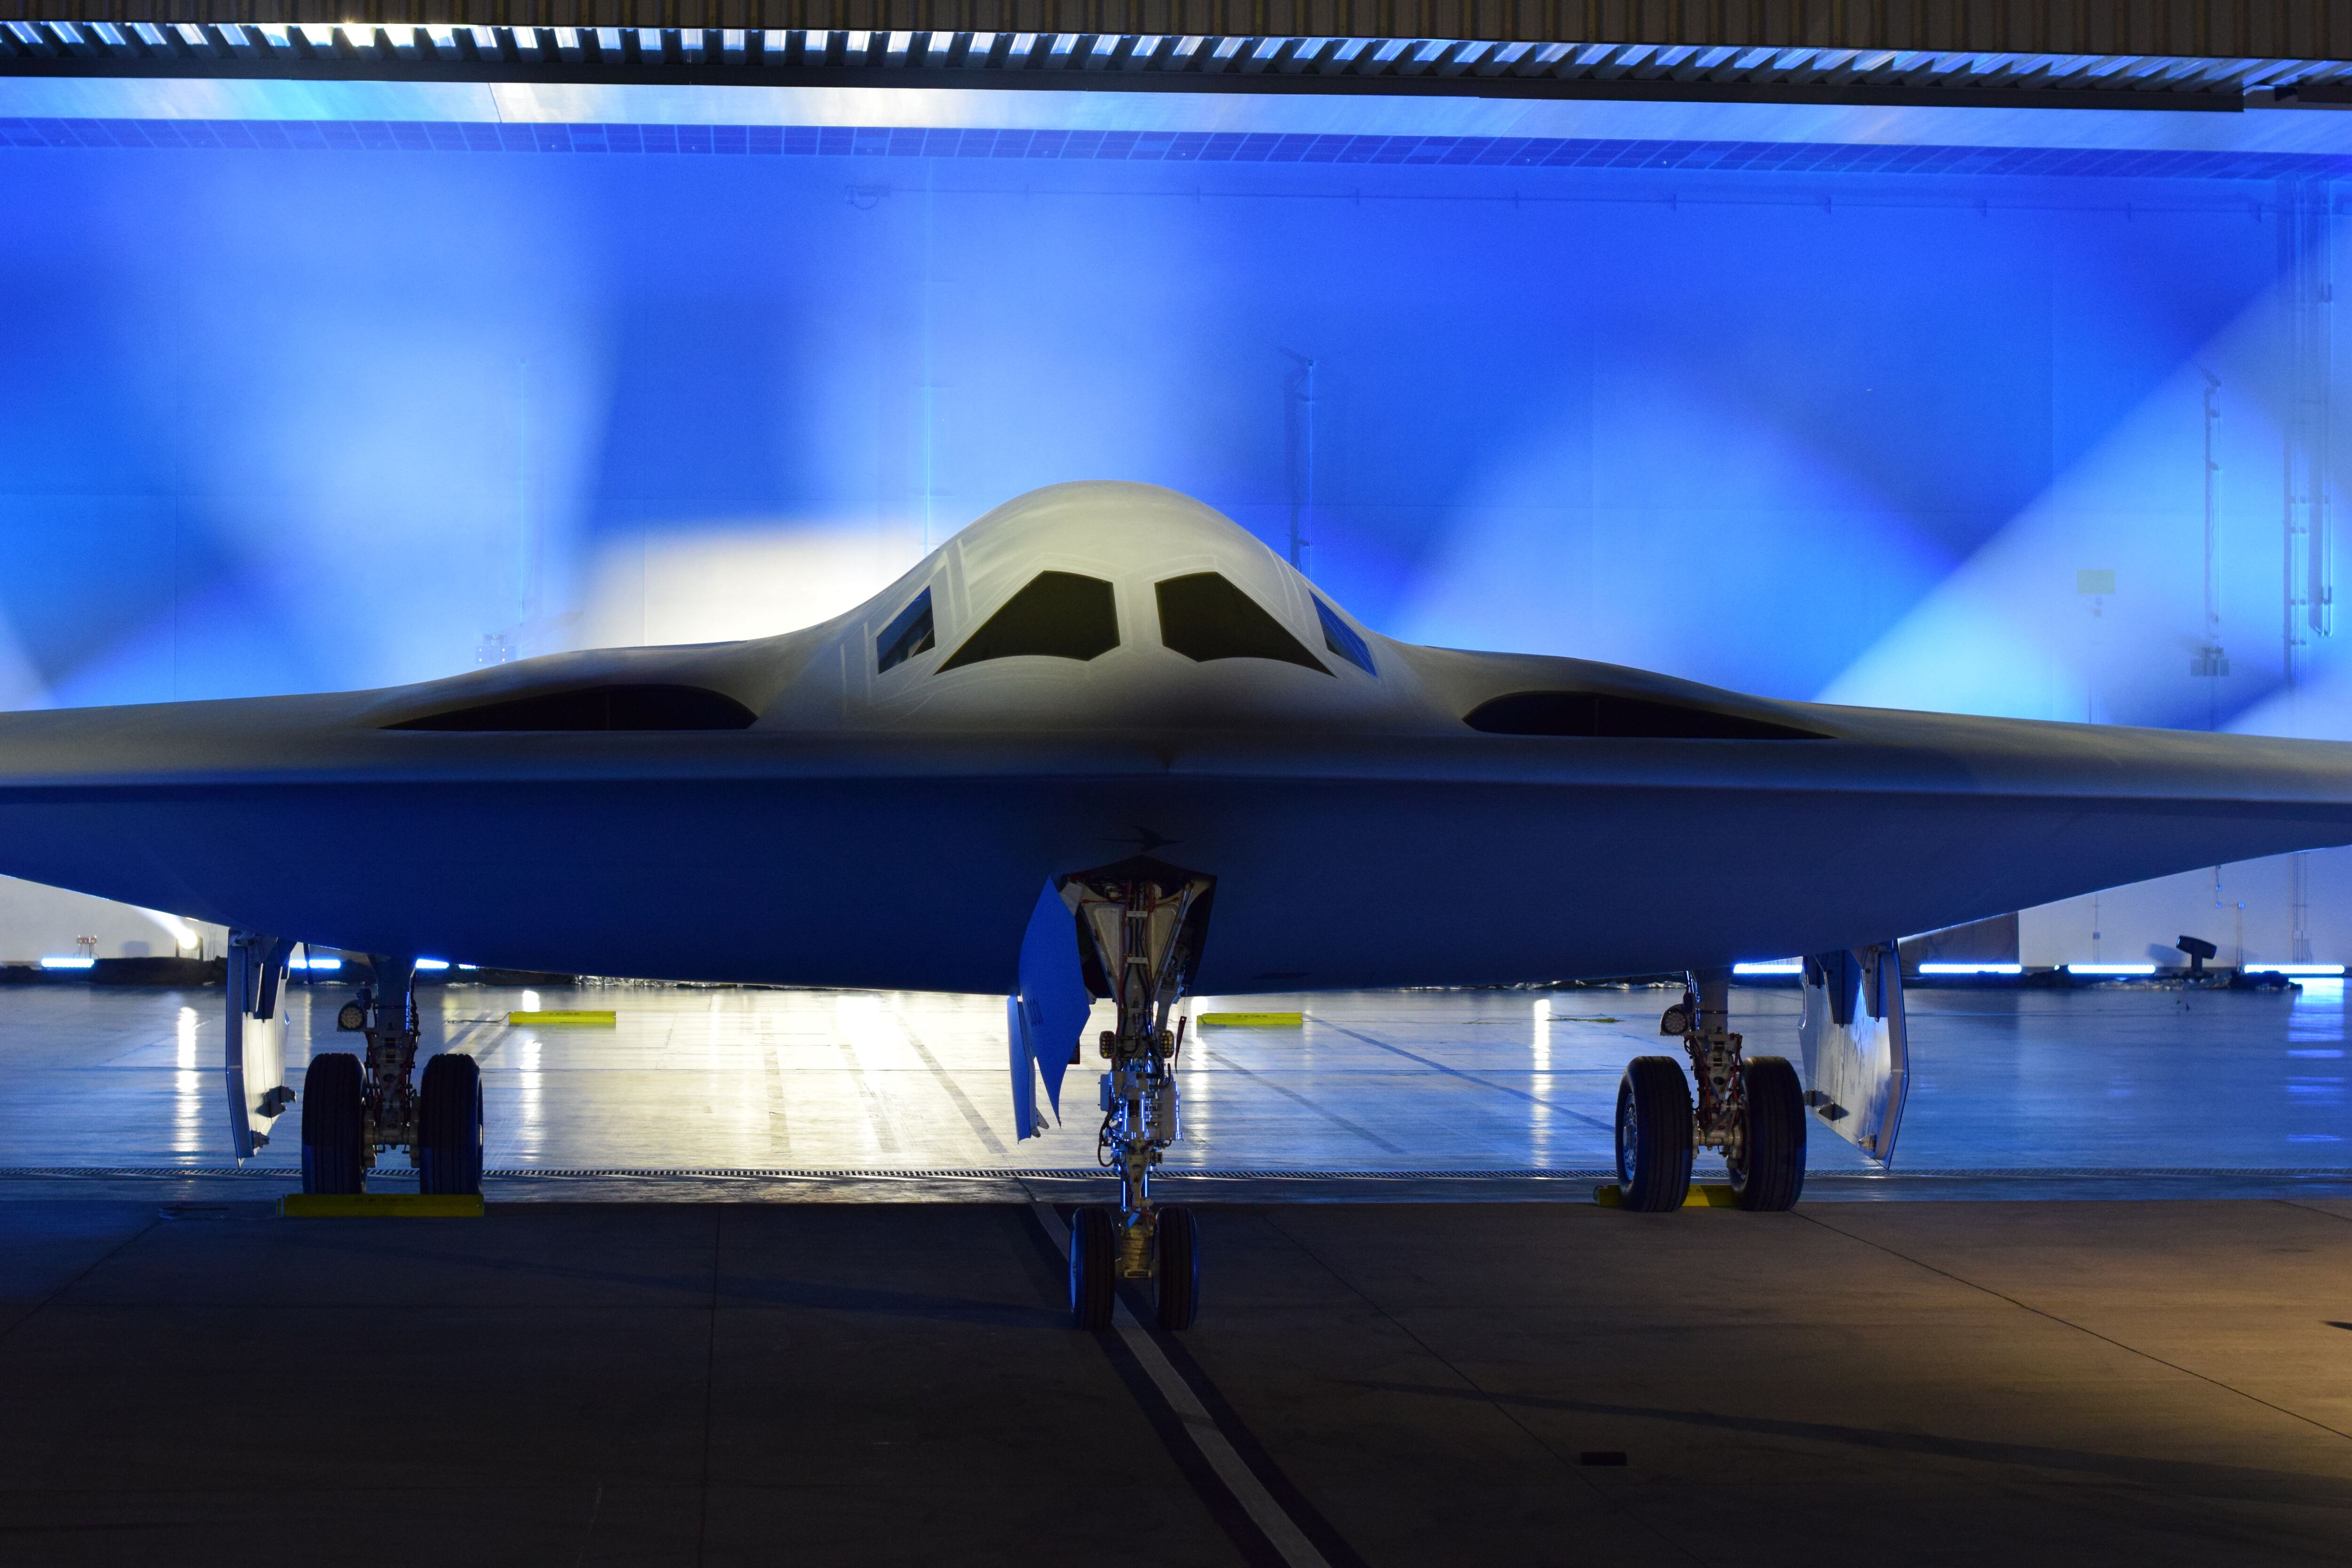 The first B-21 Raider rolls out of a hangar at Air Force Plant 42 in Palmdale, Calif., in a ceremony attended by Defense Secretary Lloyd Austin, military leaders and lawmakers, and the families of some Doolittle Raiders for whom the bomber is named. (Stephen Losey/Staff)